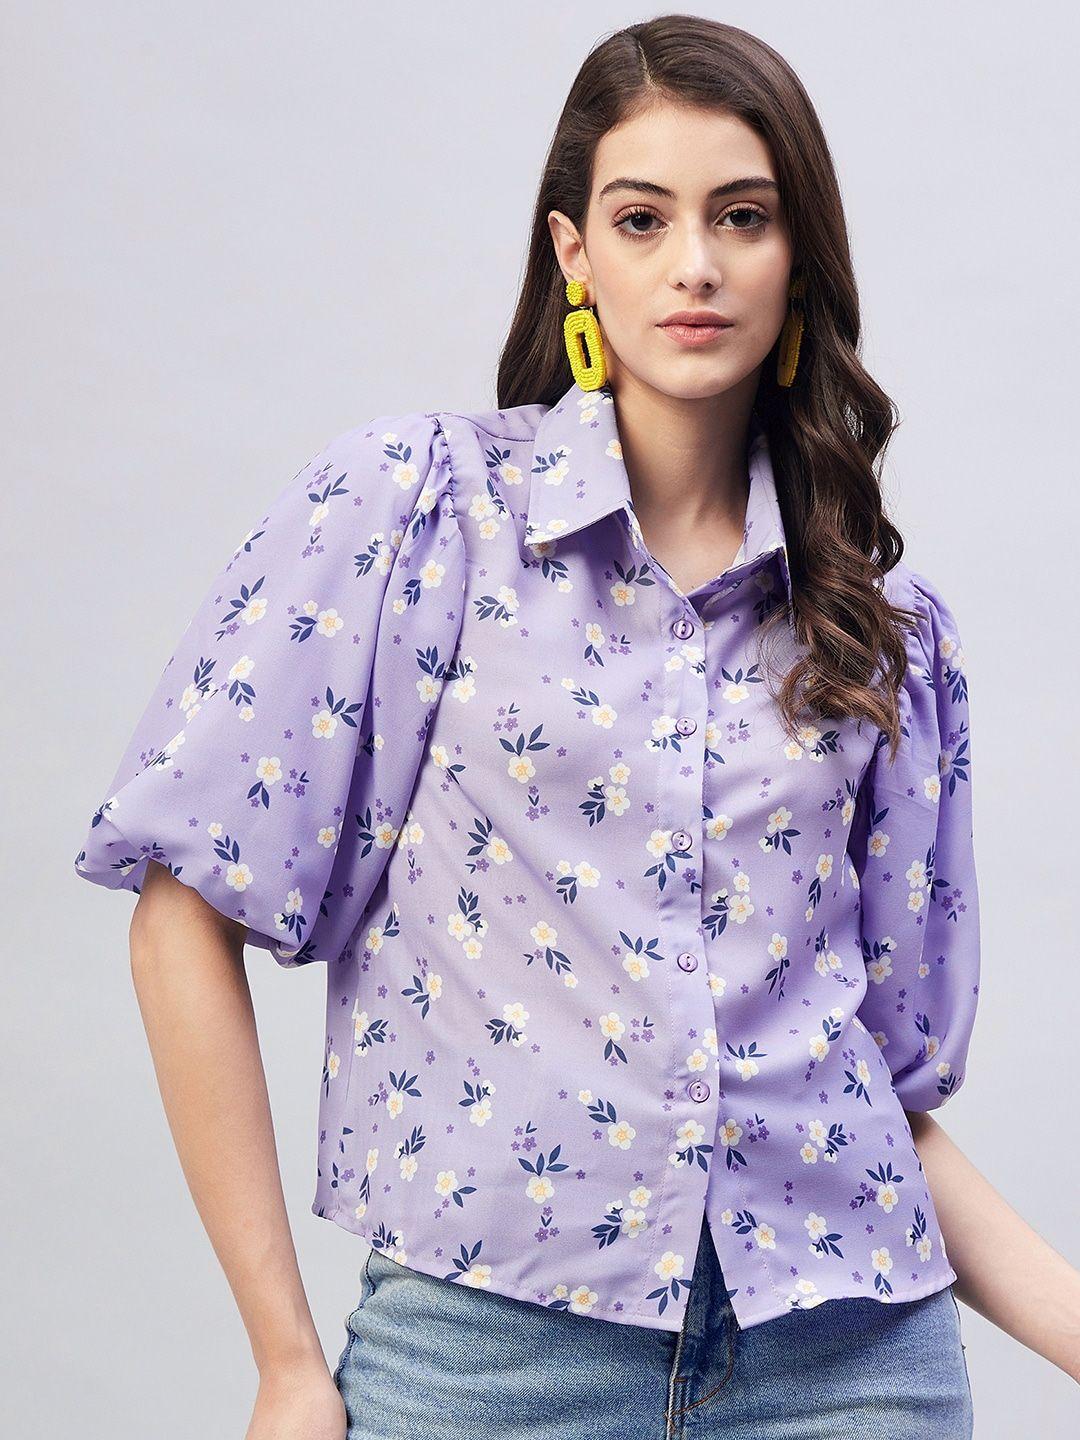 marie claire floral print crepe shirt style top